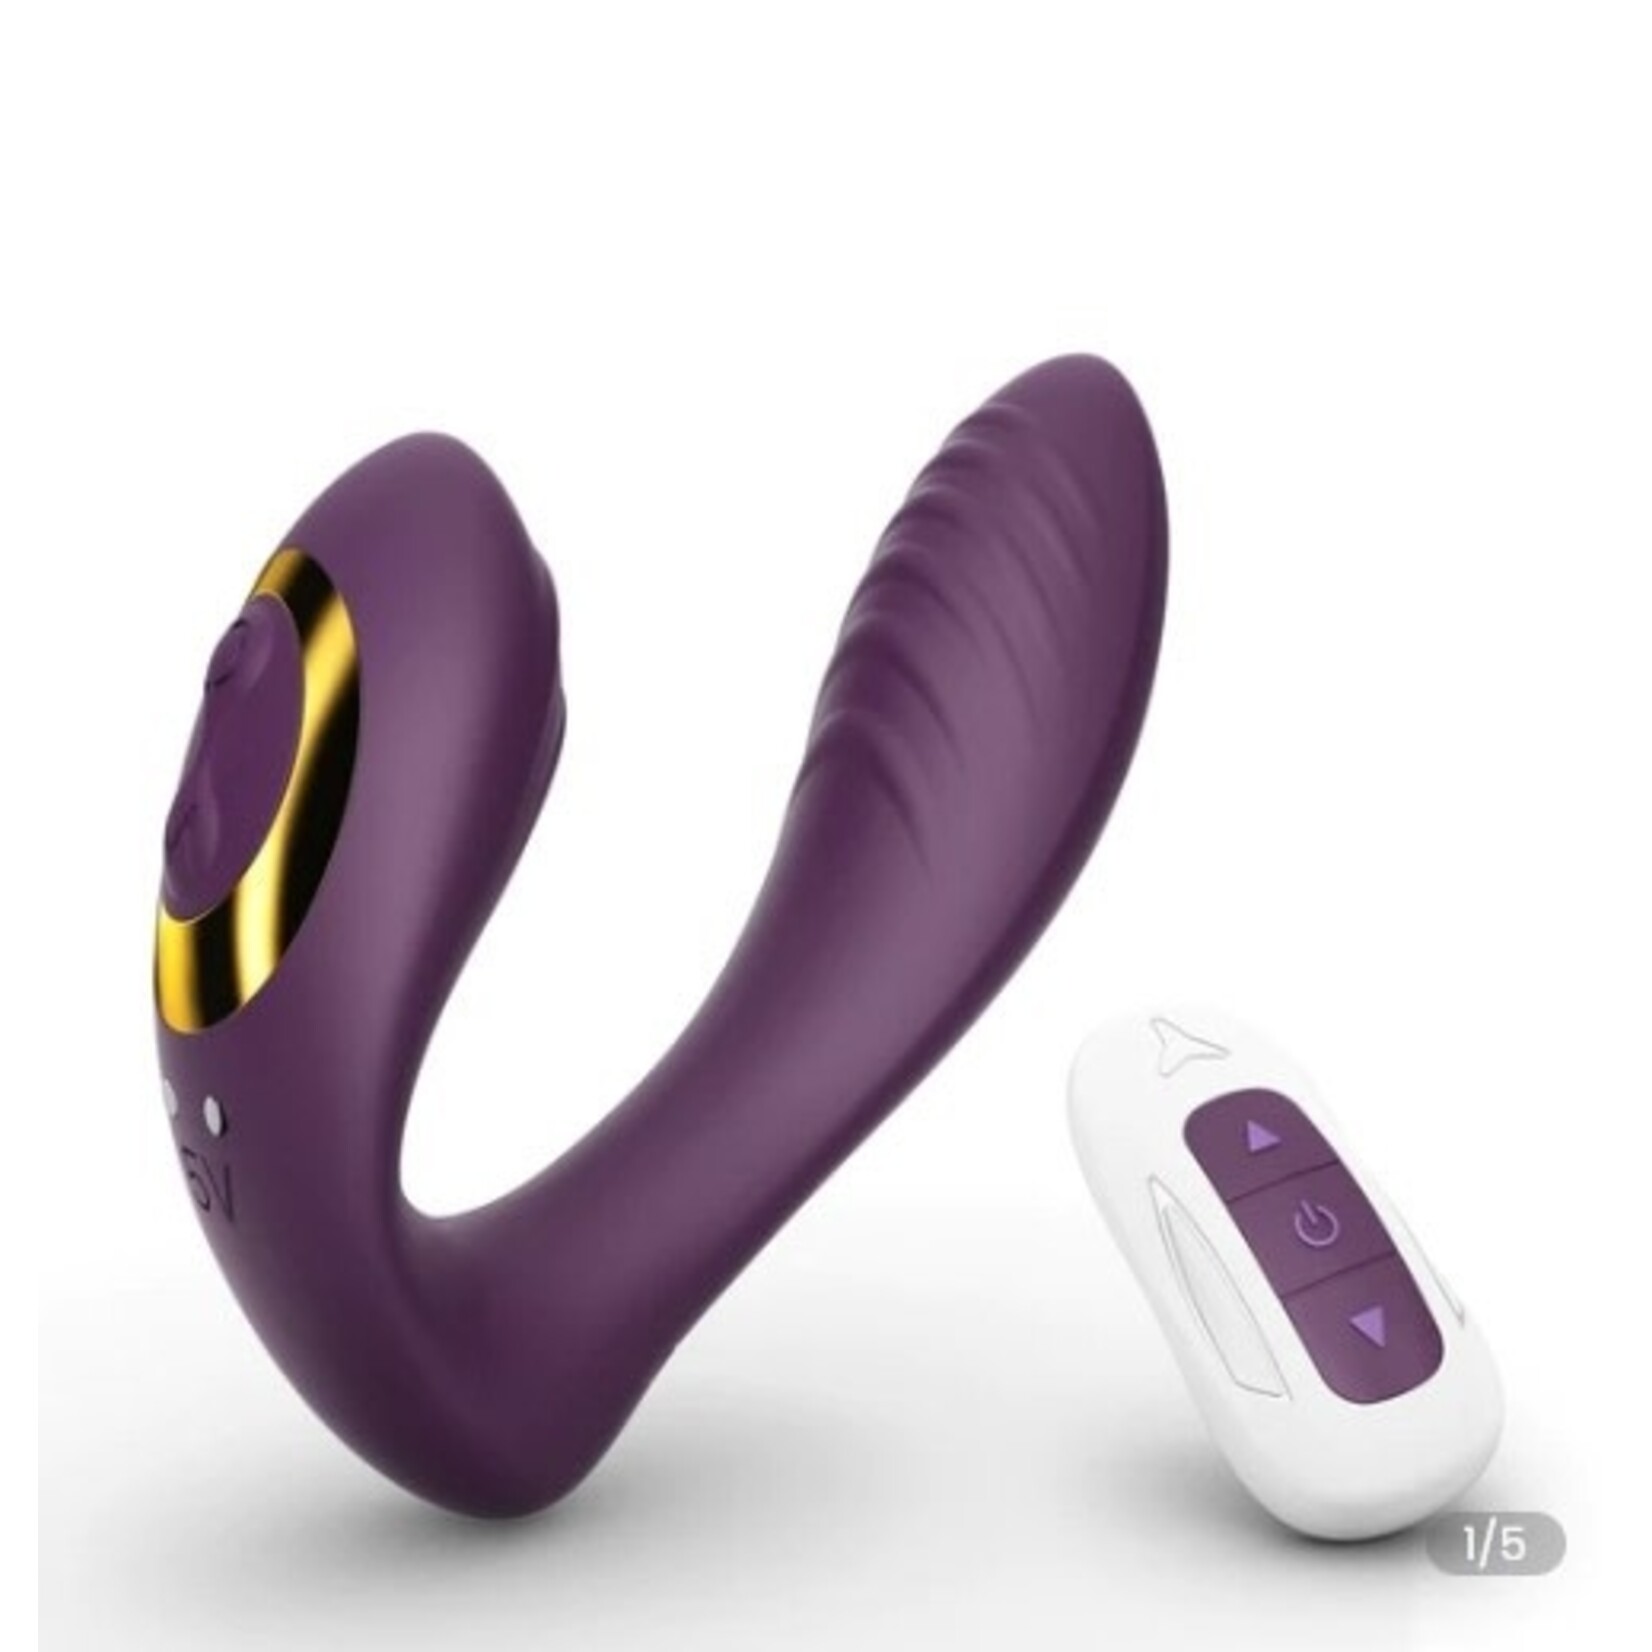 TRACY'S DOG TRACY'S DOG - WEARABLE PANTY VIBRATOR WITH REMOTE CONTROL